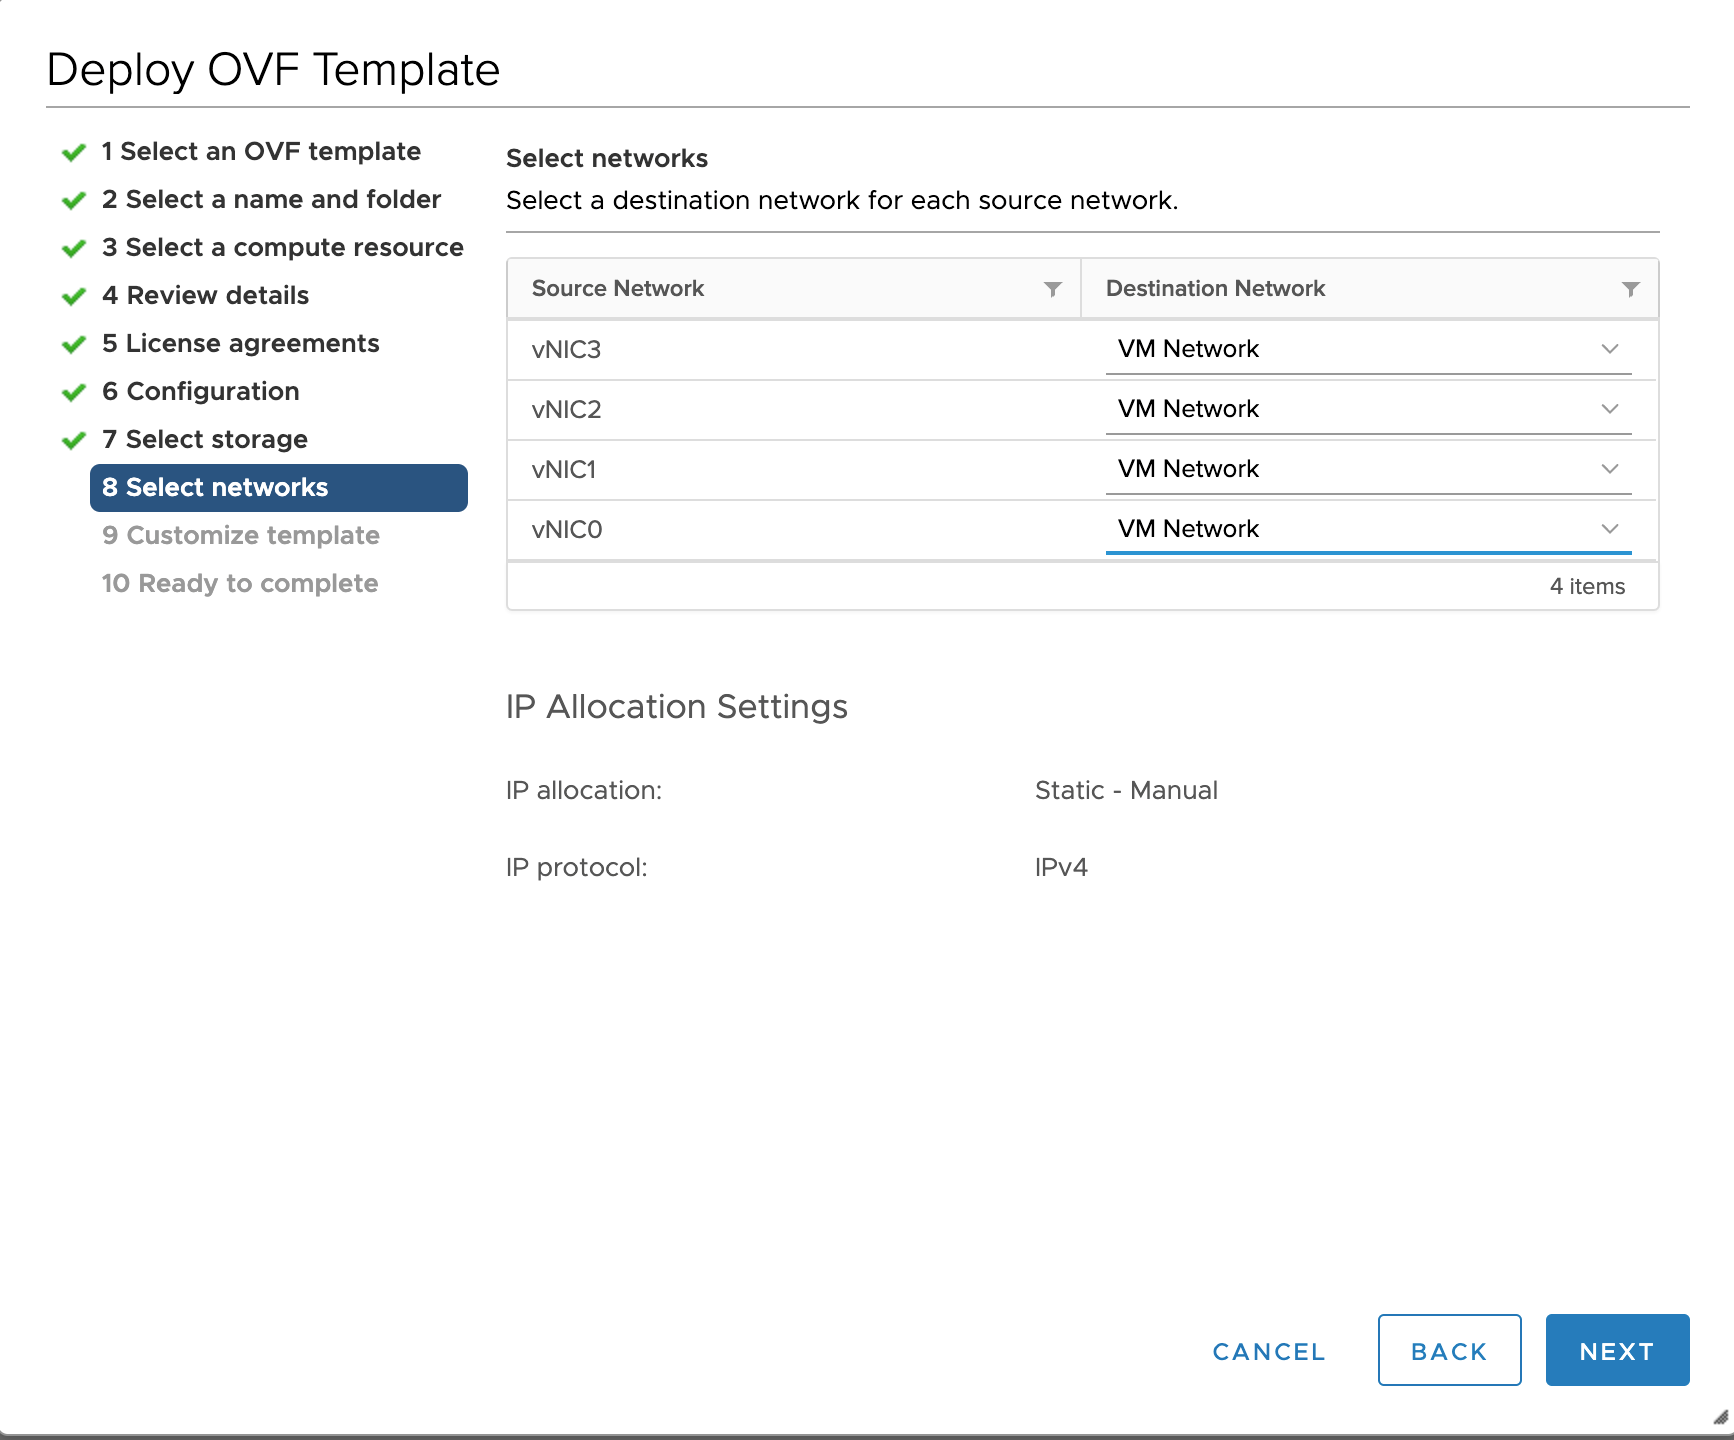 Deploy OVF Template - Select networks Window